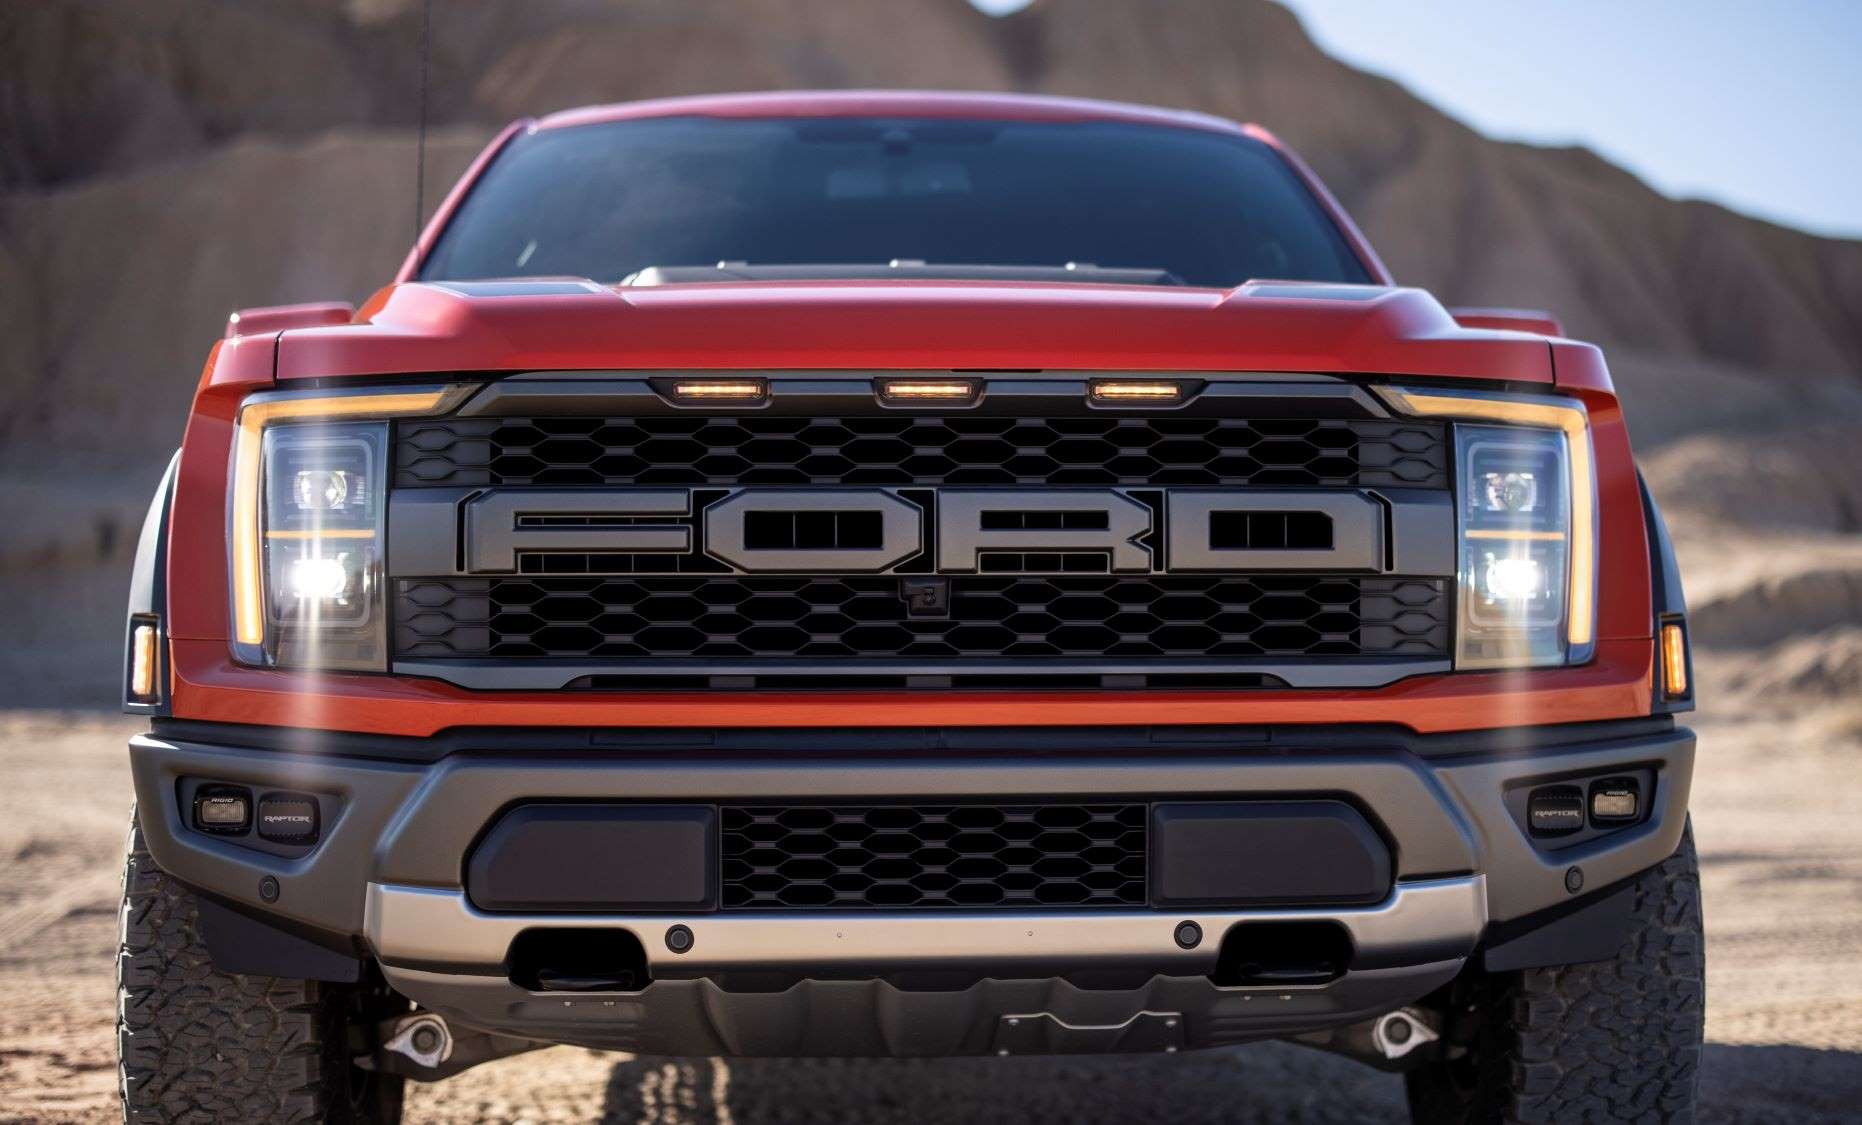 Front view of orange 2022 Ford F-150 Raptor, highlighting release date of F-150 Raptor R